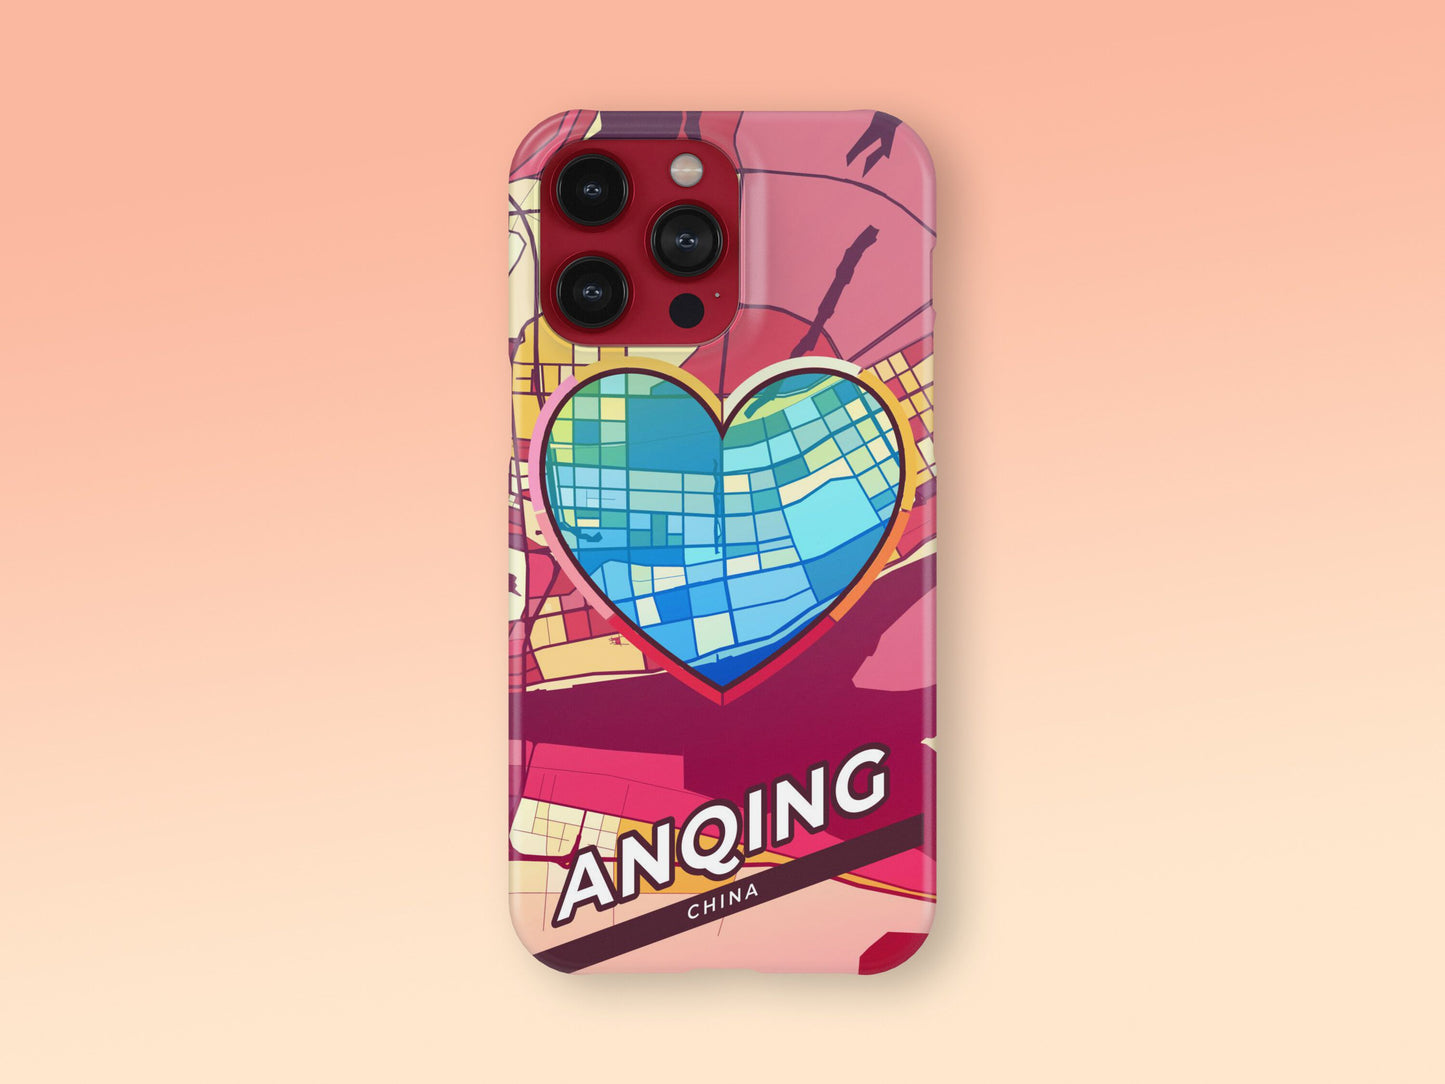 Anqing China slim phone case with colorful icon. Birthday, wedding or housewarming gift. Couple match cases. 2